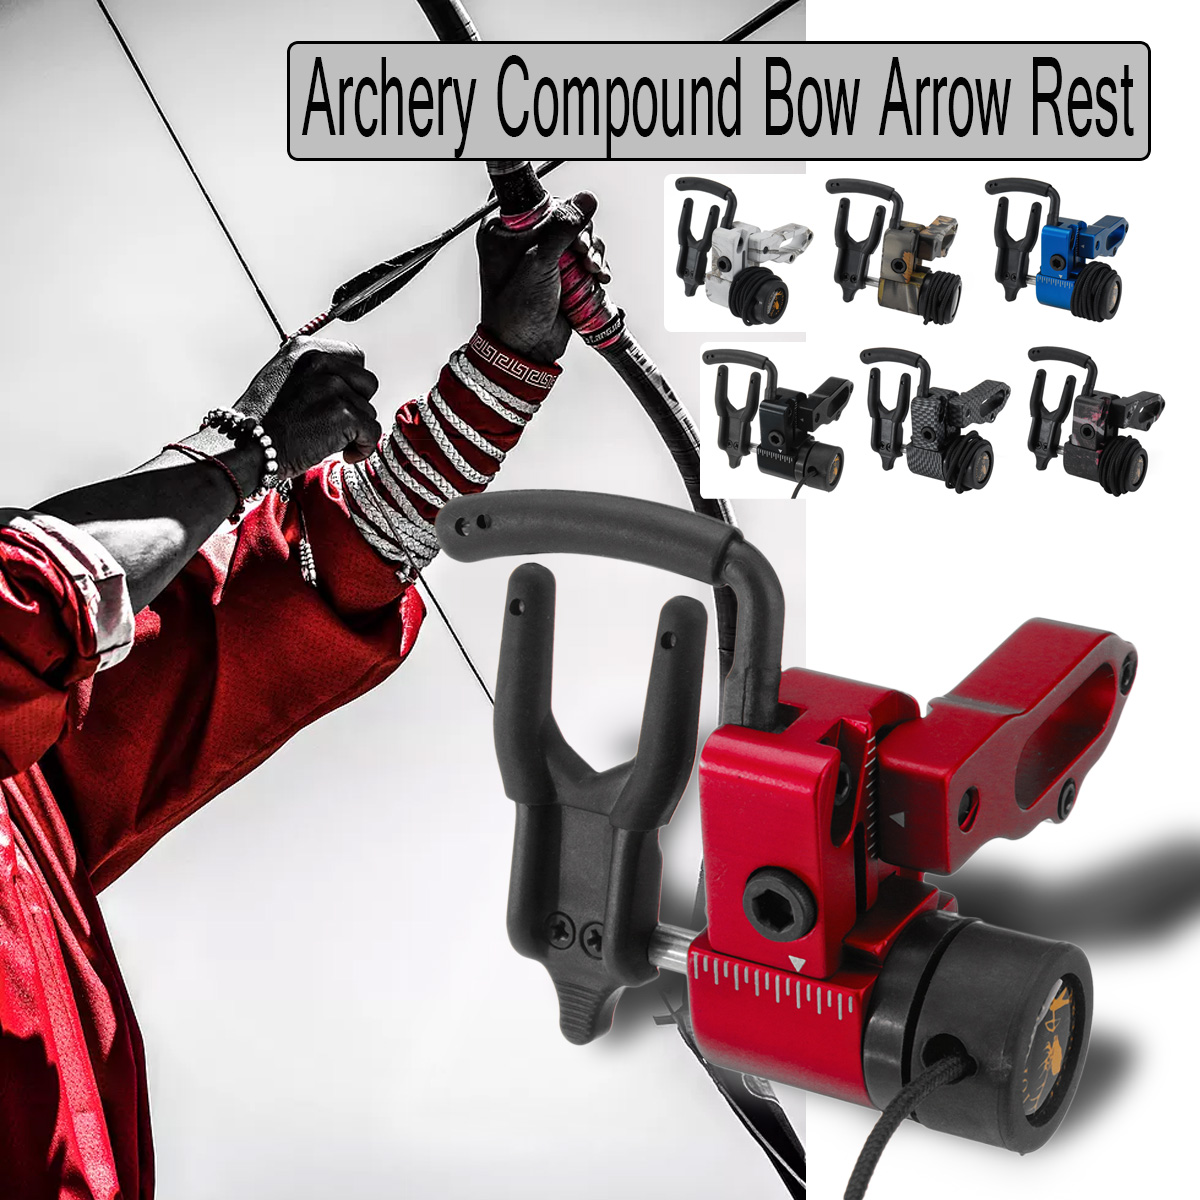 Archery-Target-Compound-Bow-Arrow-Drop-Away-Arrow-Rest-Holder-With-Cord-Lock-Adjustable-Right-Hand-C-1469146-1